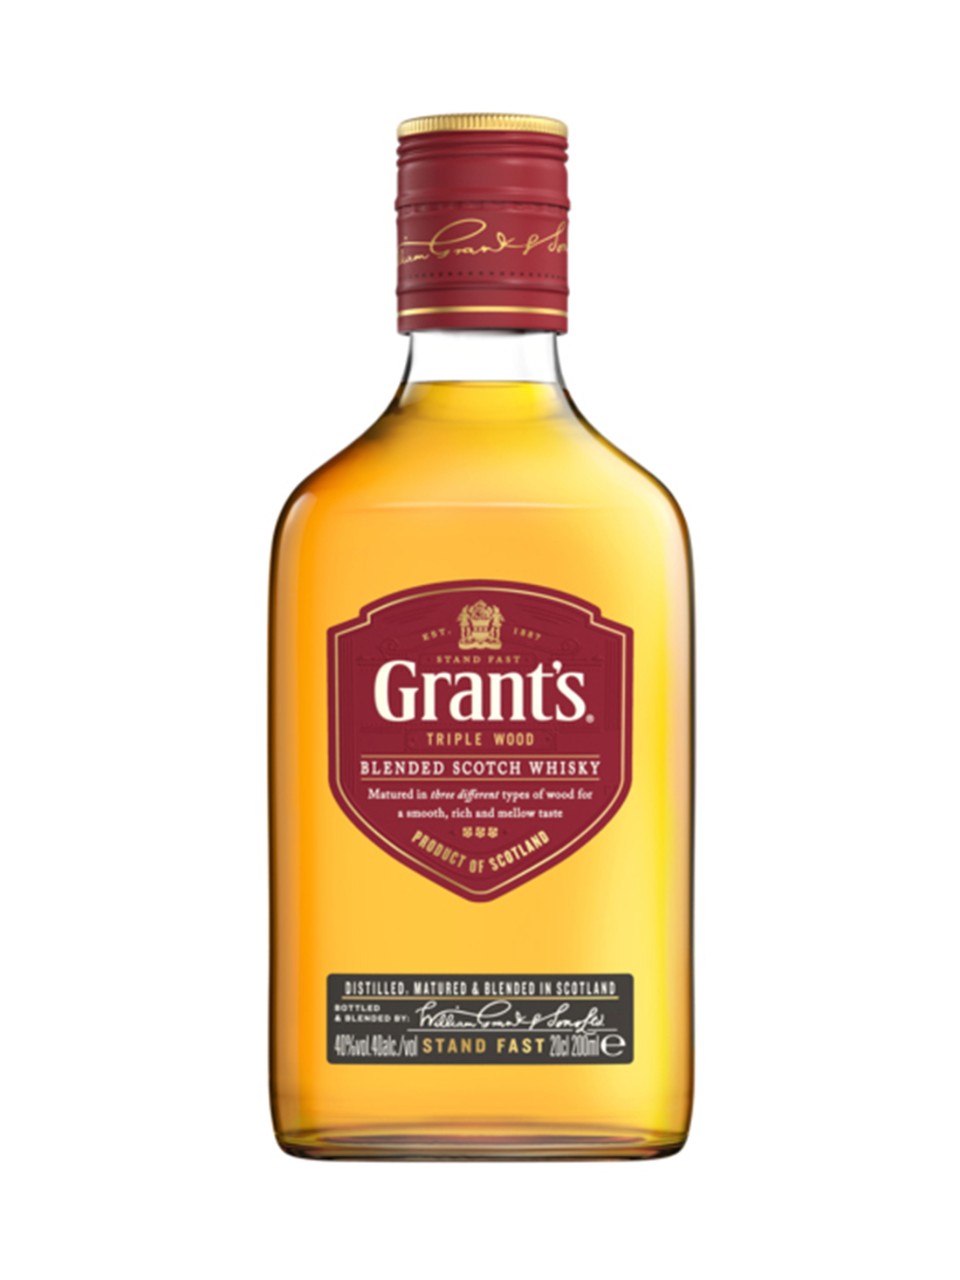 Grant's Triple Wood Blended Scotch Whisky | LCBO